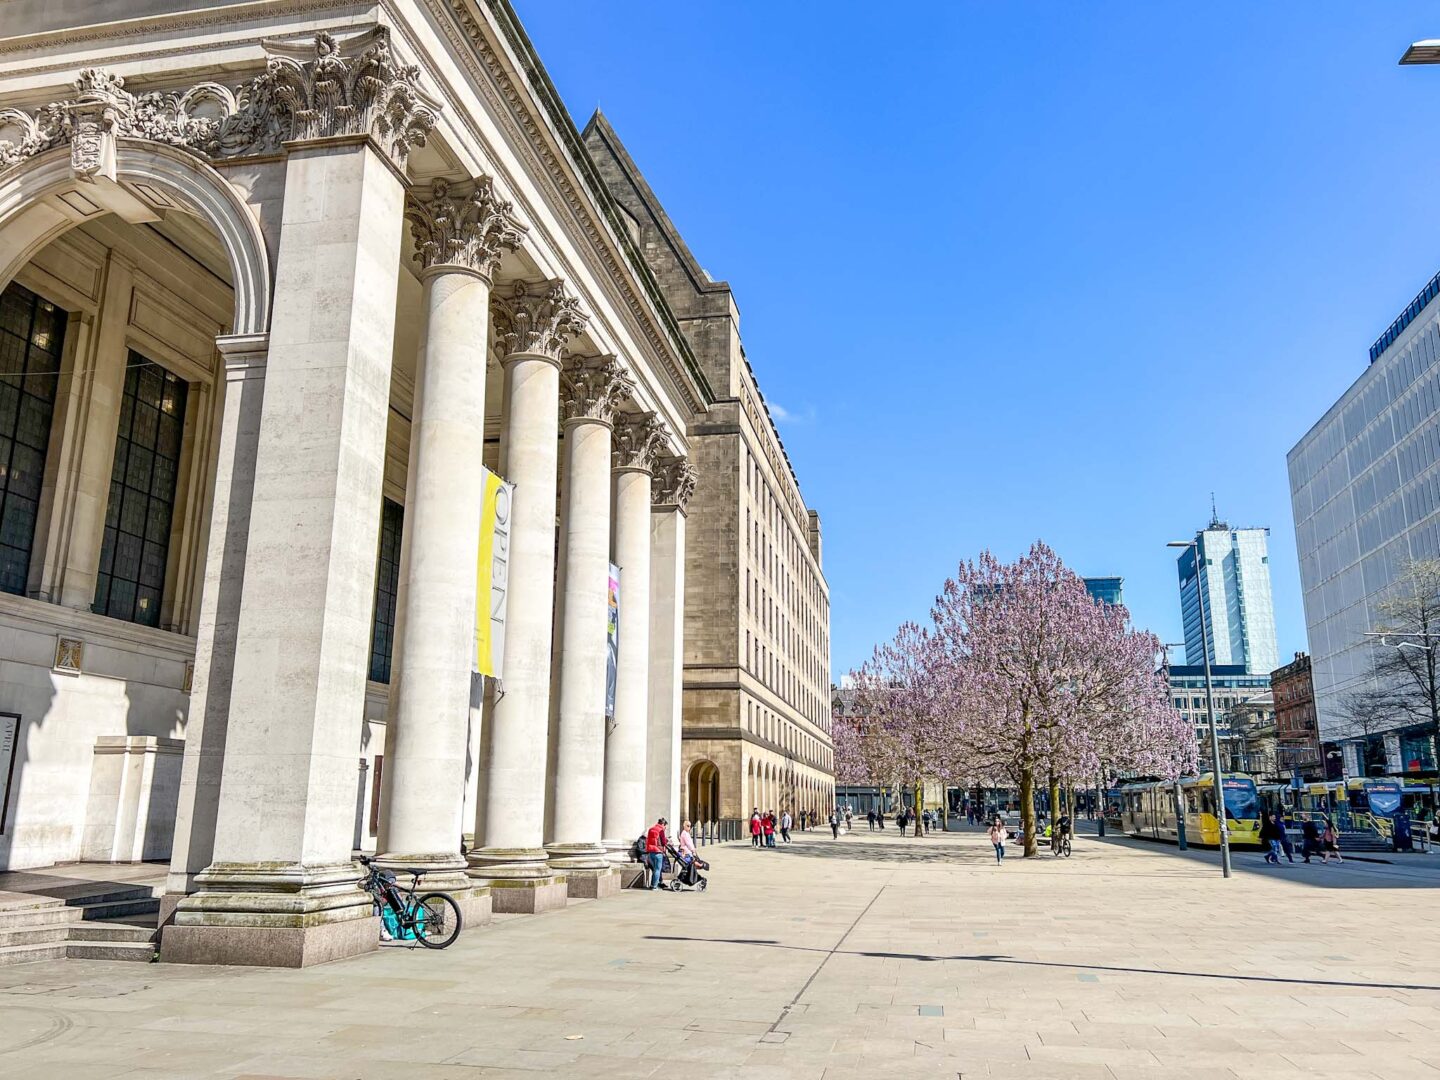 Manchester Library and St Peters Square, one day in Manchester